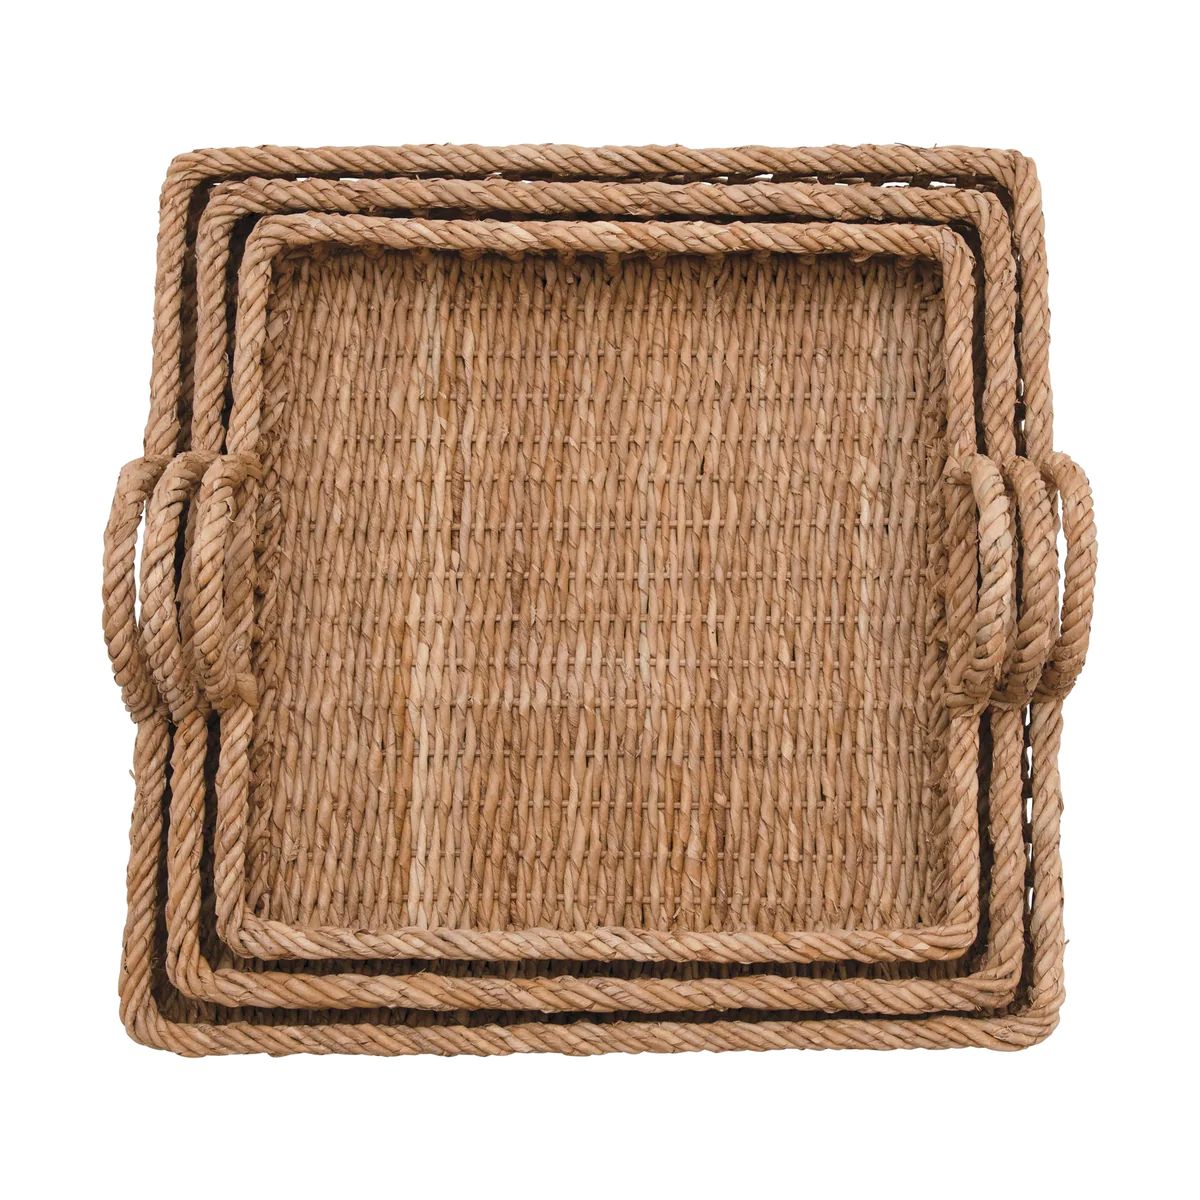 Handwoven Basket Tray | APIARY by The Busy Bee